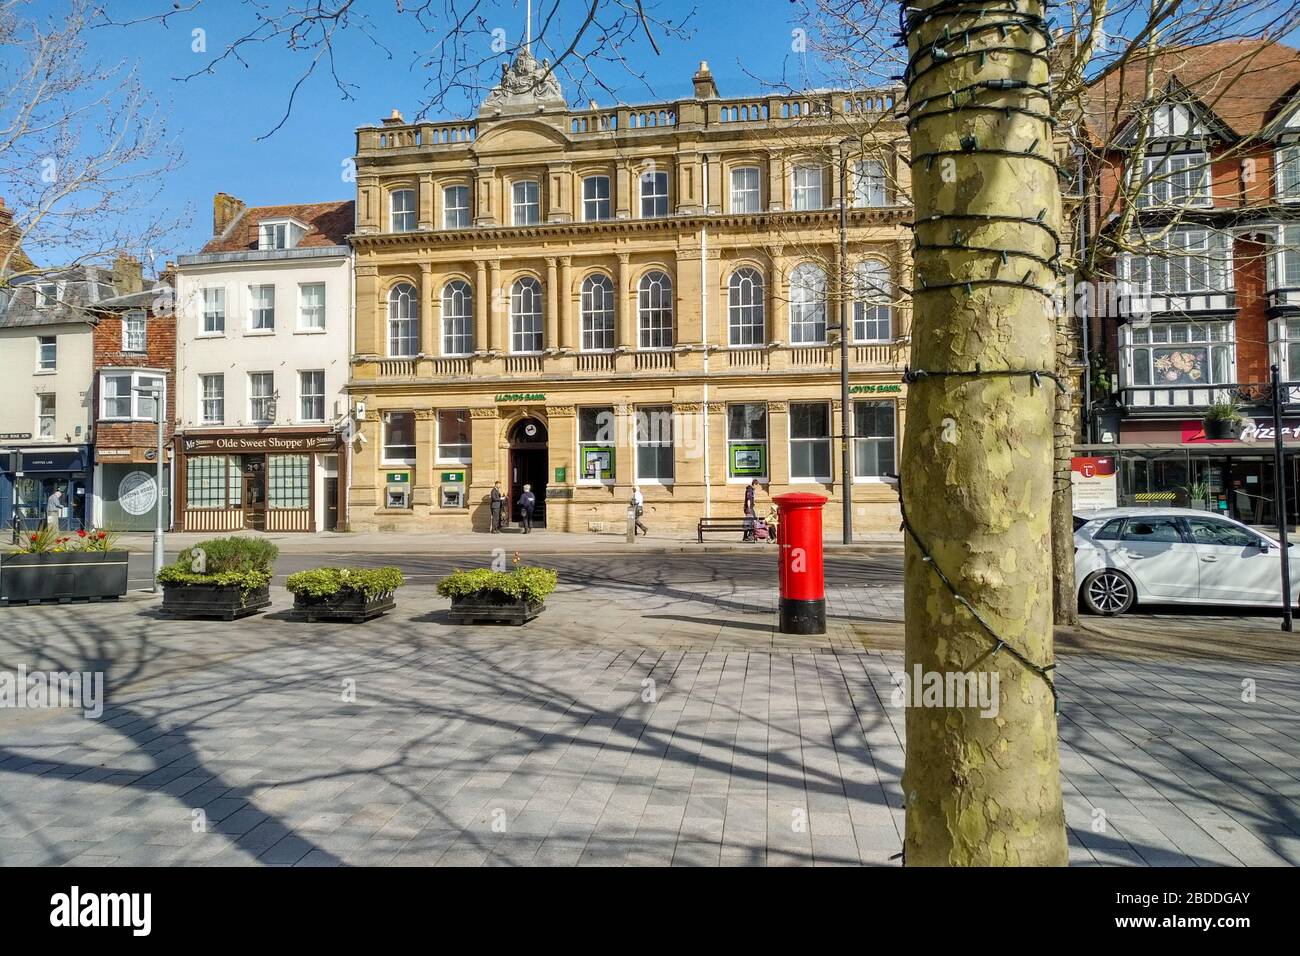 Lloyds bank opposite Salisbury market place on market day in April 2020. Empty scene at 1030 am due to Covid-19. UK Stock Photo